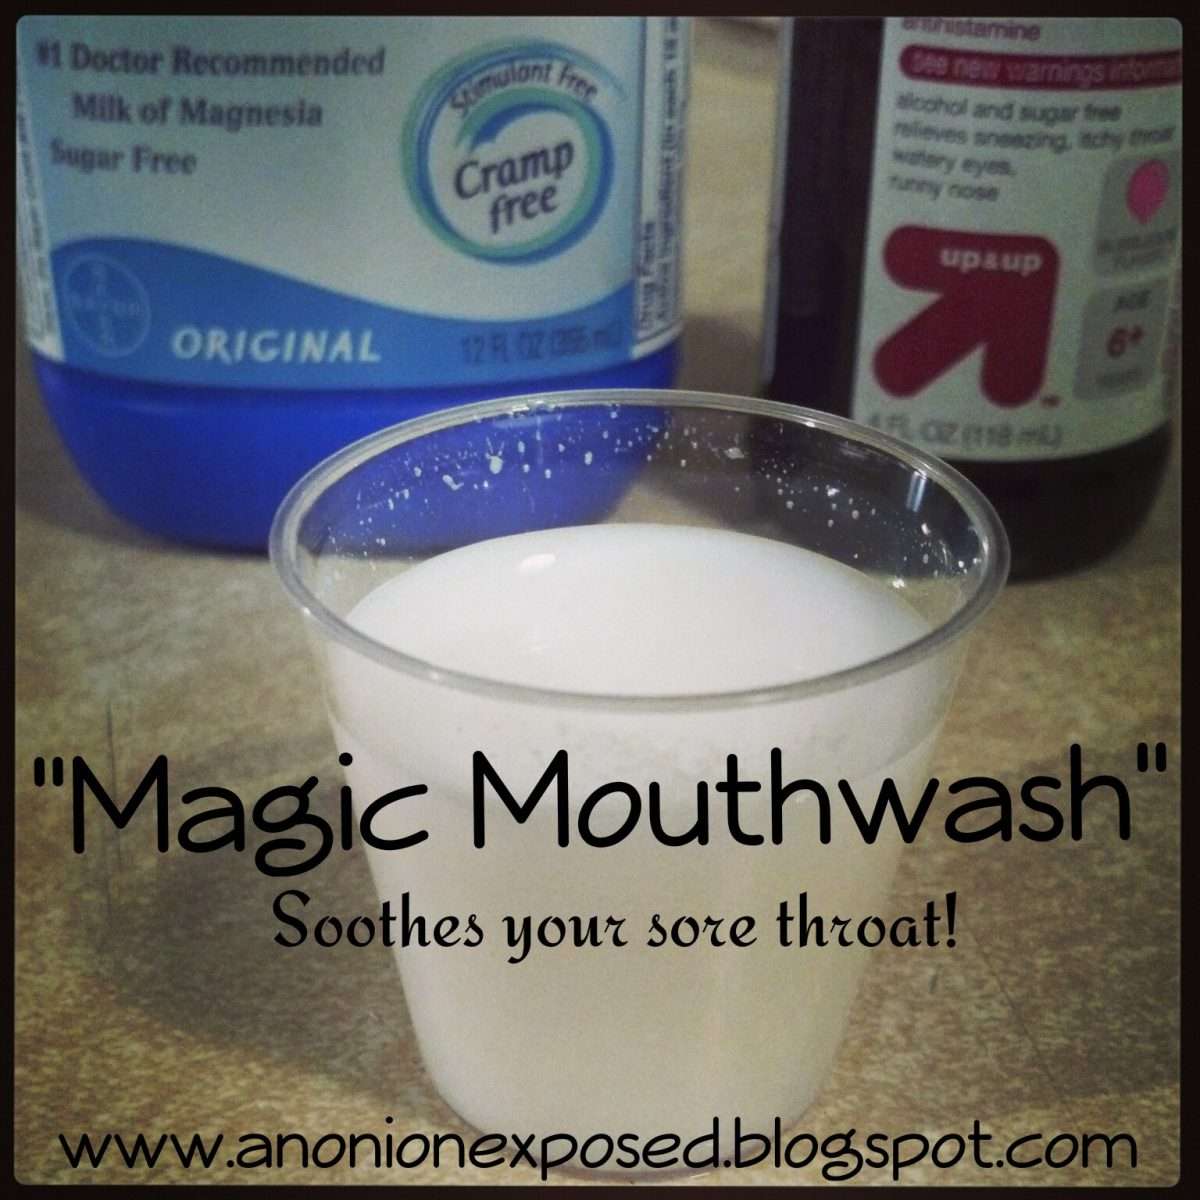 An Onion Exposed: " Magic Mouthwash"